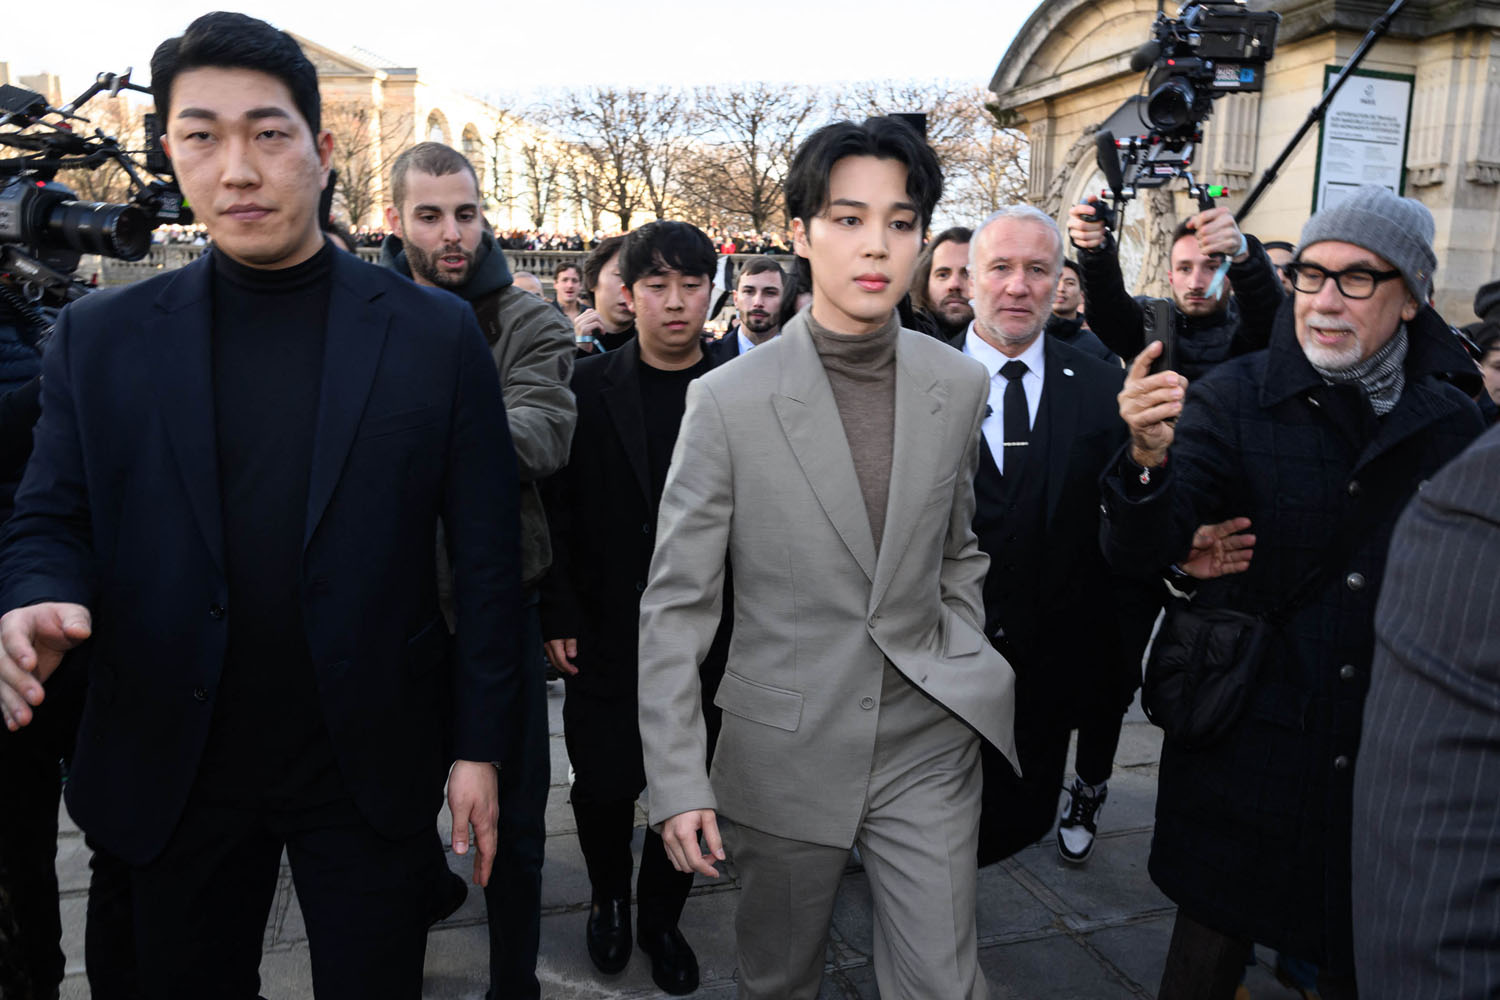 J-Hope of BTS attending the Dior Homme Menswear Fall-Winter 2023